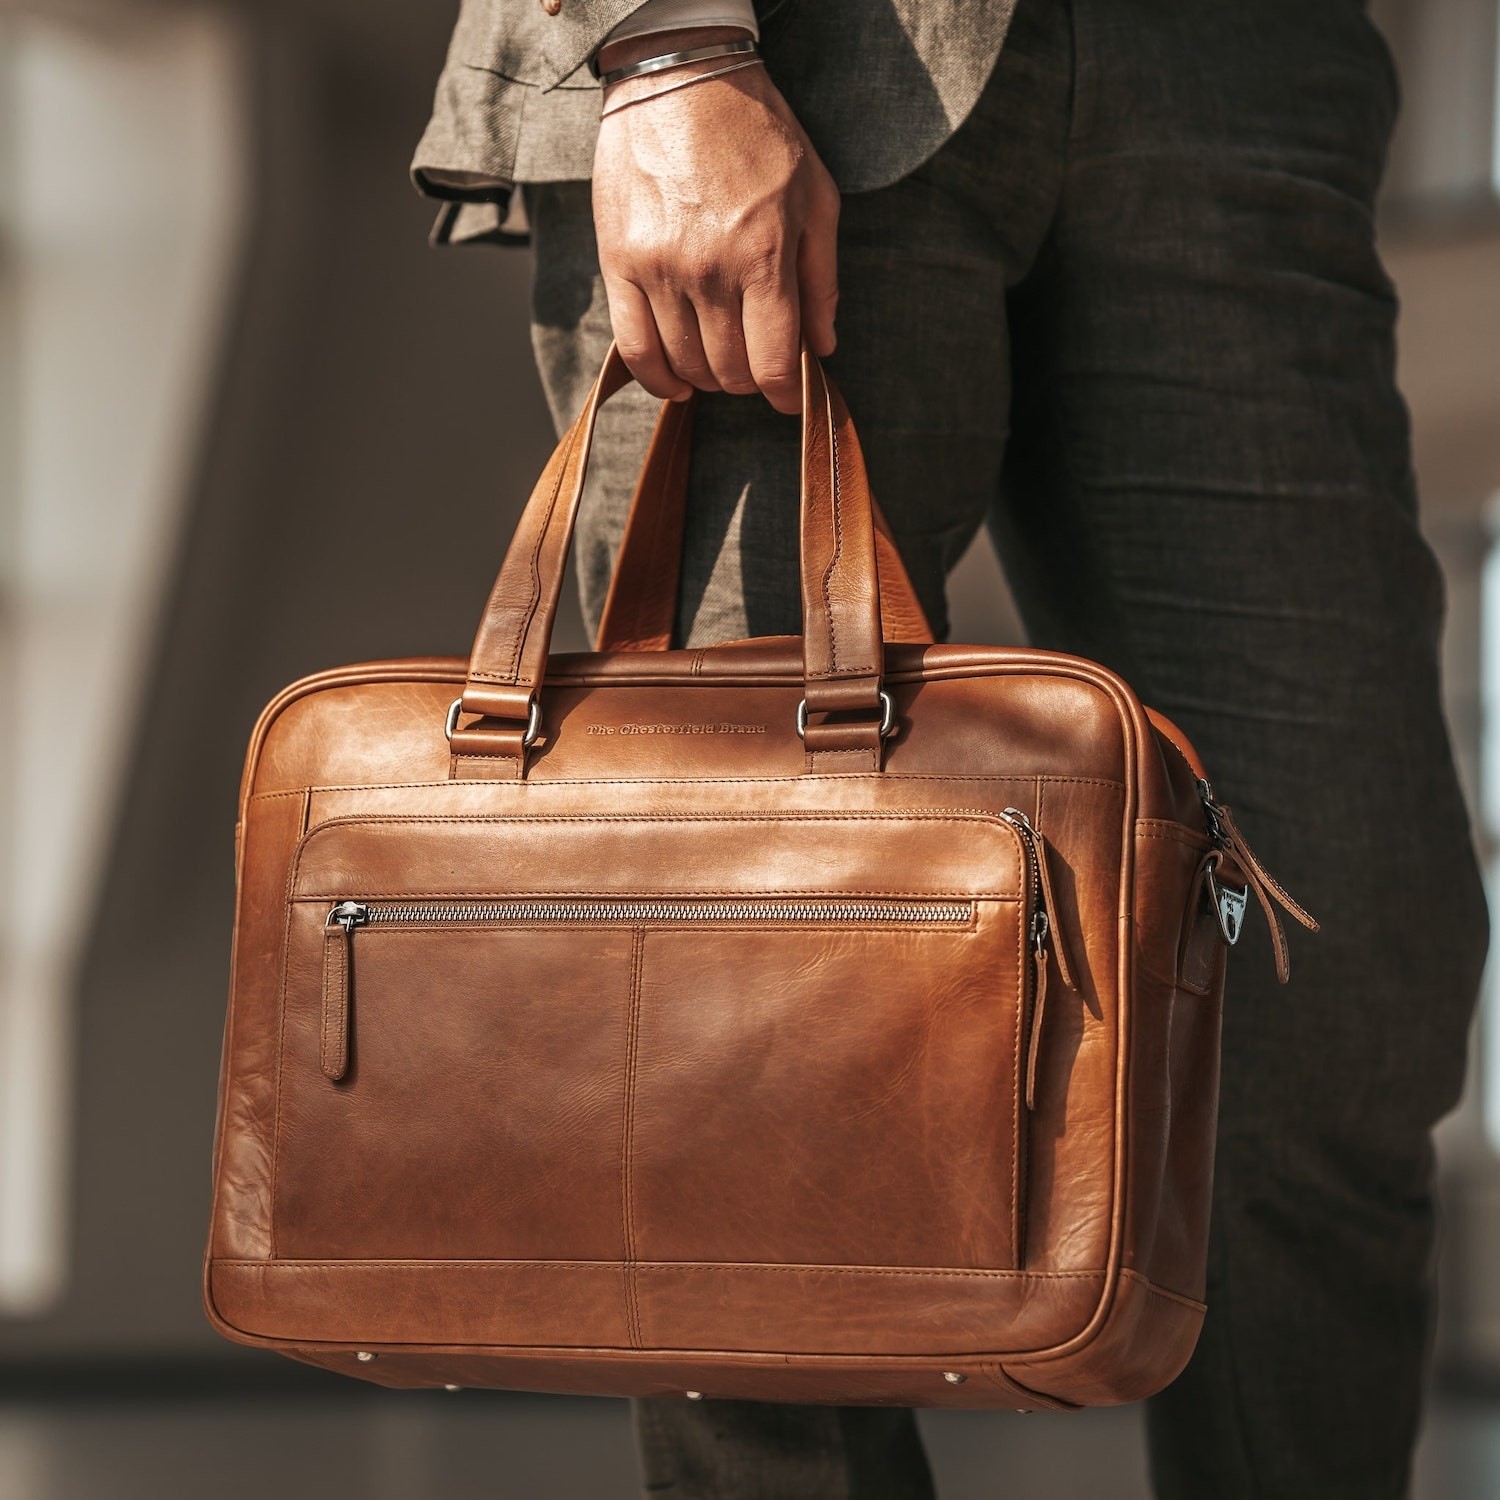 Branded Leather Bags for Men in Singapore